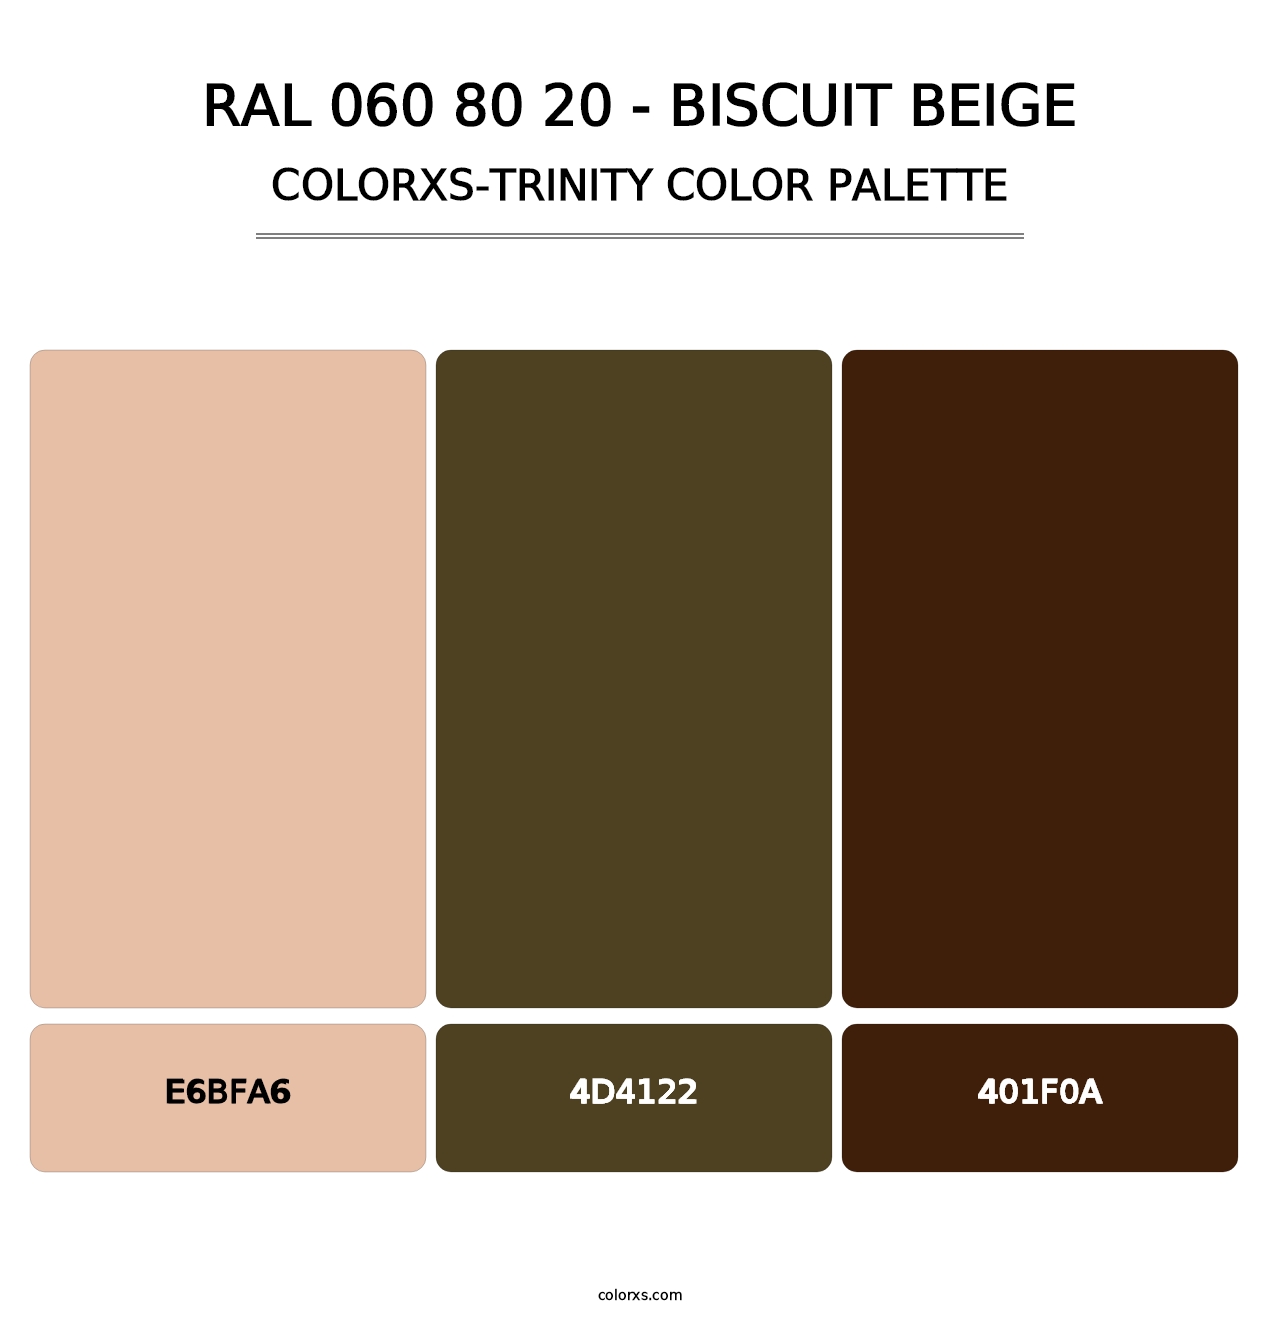 RAL 060 80 20 - Biscuit Beige - Colorxs Trinity Palette